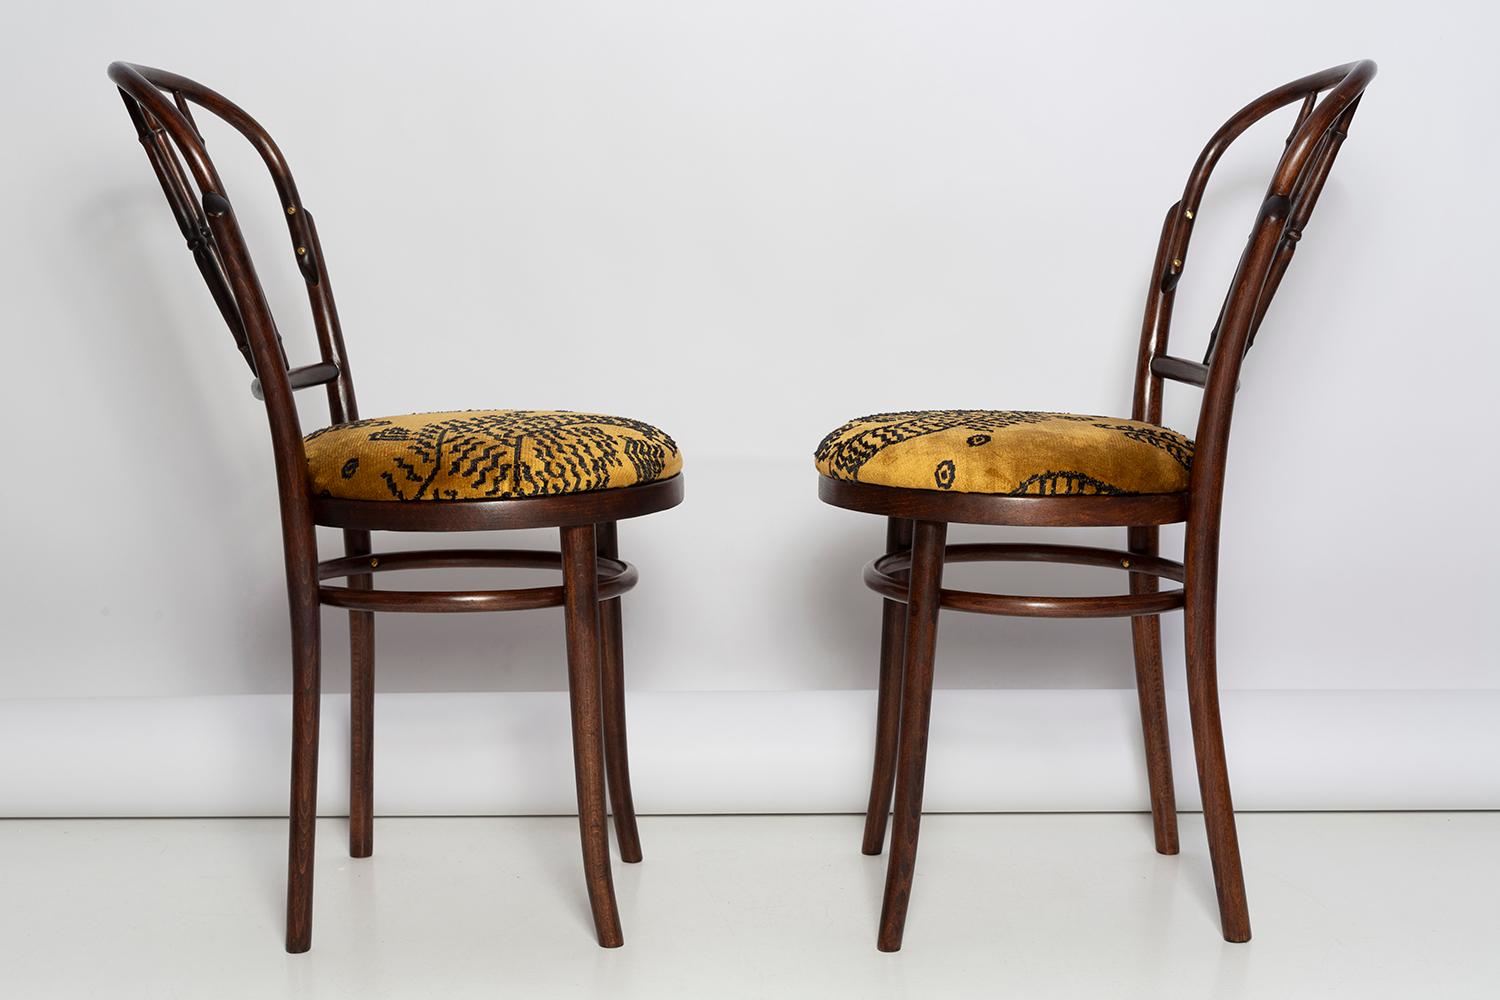 Hand-Crafted Pair of Mid Century Beige Tiger Dedar Chairs, Fameg Factory, Poland, 1960s For Sale